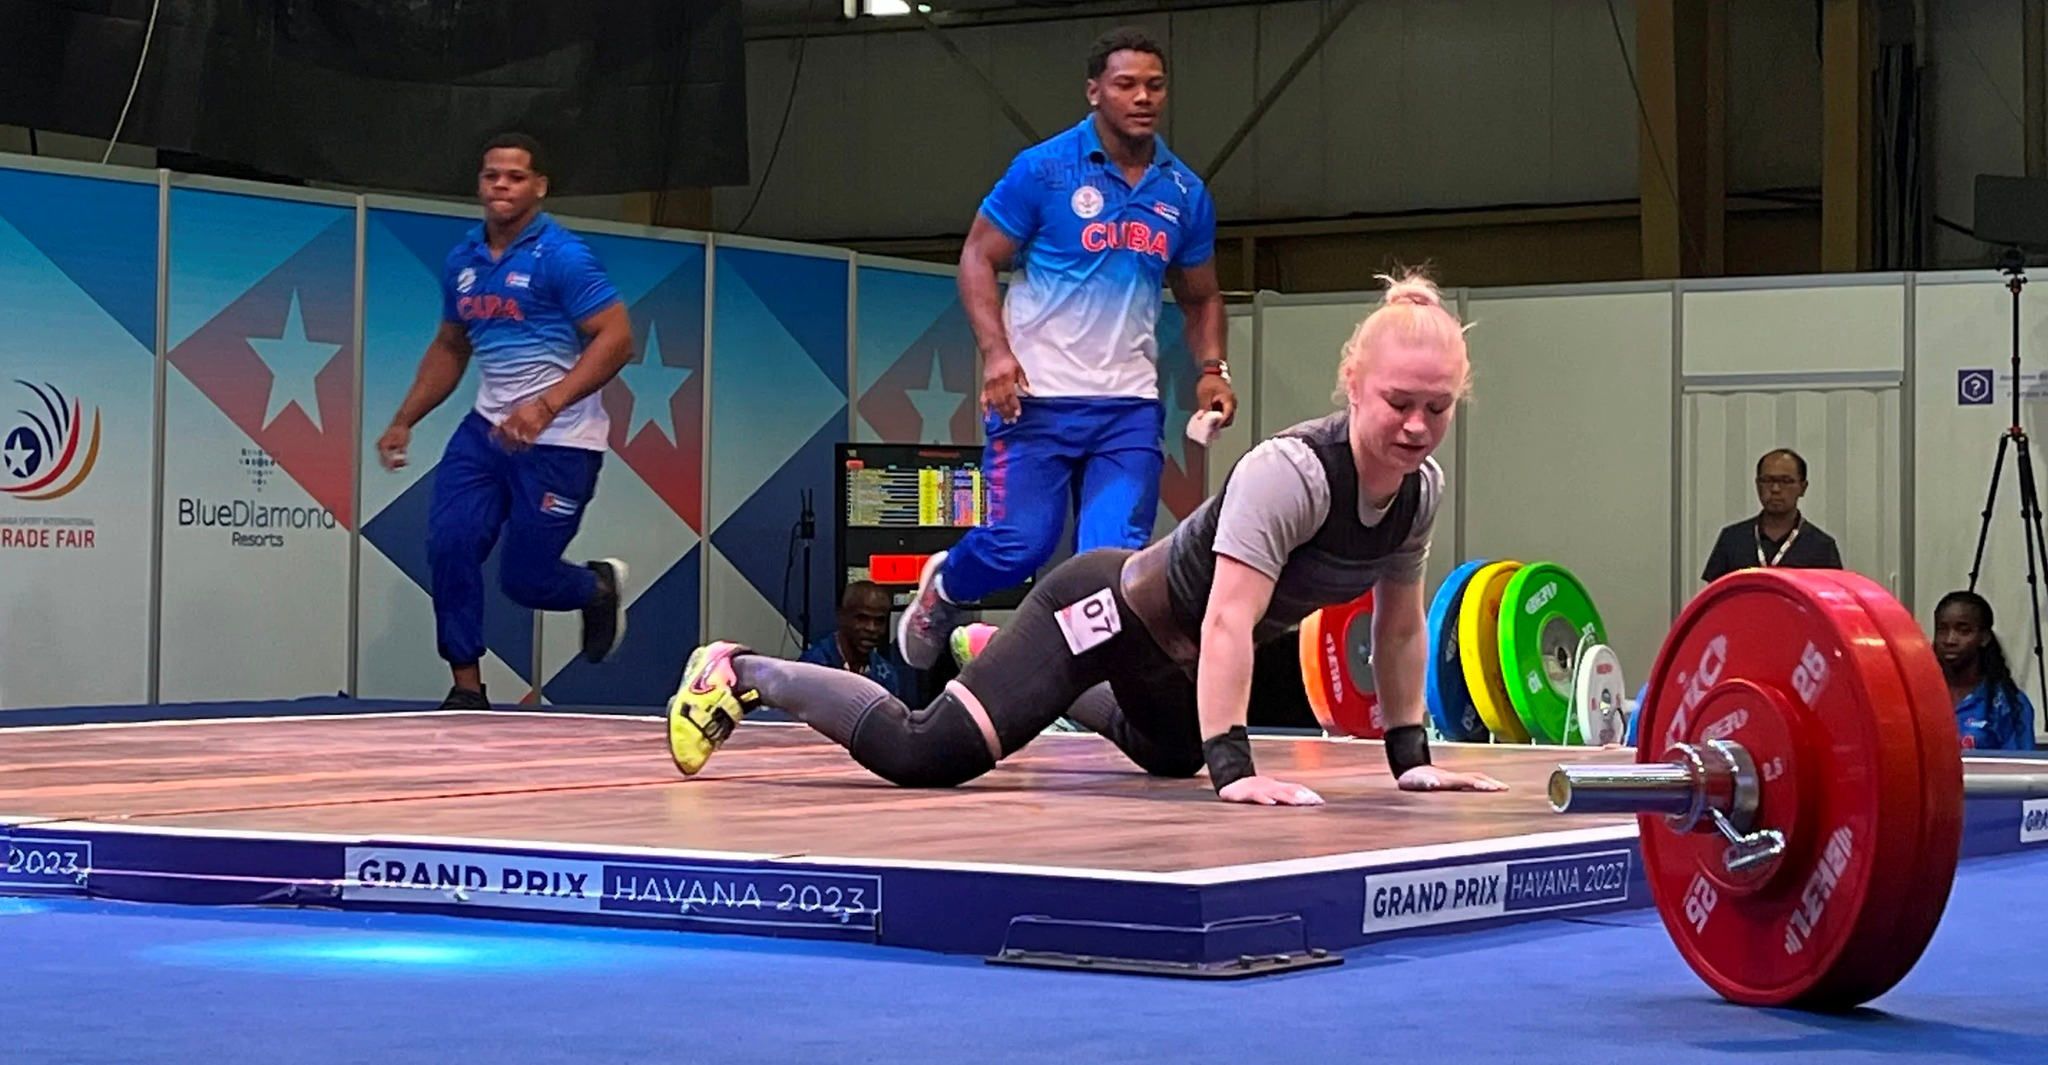 Belarus Weightlifting Federation vice-president Vitaliy Kreidic was pleased overall with his team's performance at the IWF Grand Prix, but believes lifters like Alina Shchapanava can do better ©ITG